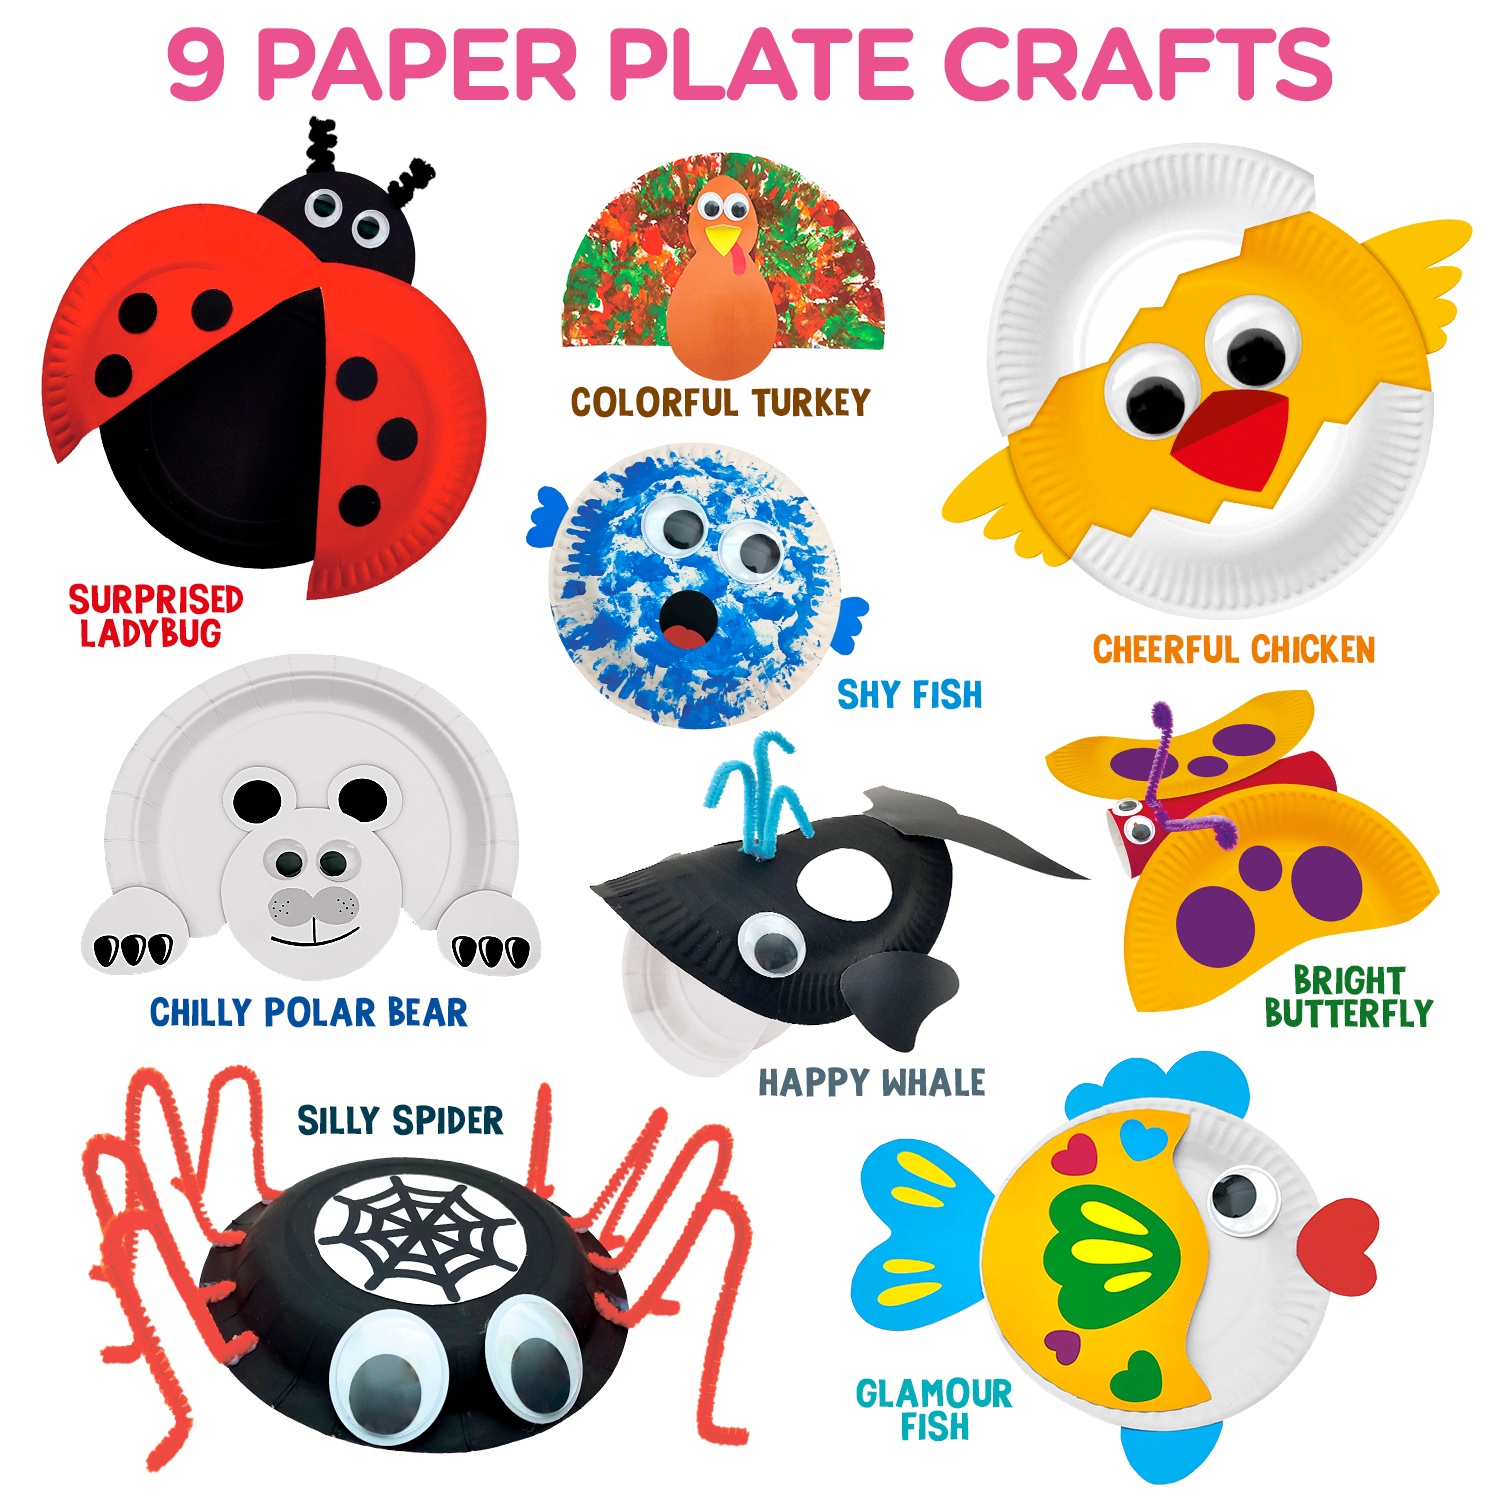 Arts and Crafts Kit for Kids- Create 8 Animal Crafts for Toddlers, Best Creative Christmas Gift for Boys & Girls Ages 3,4,5,6,7,8, Size: This Craft